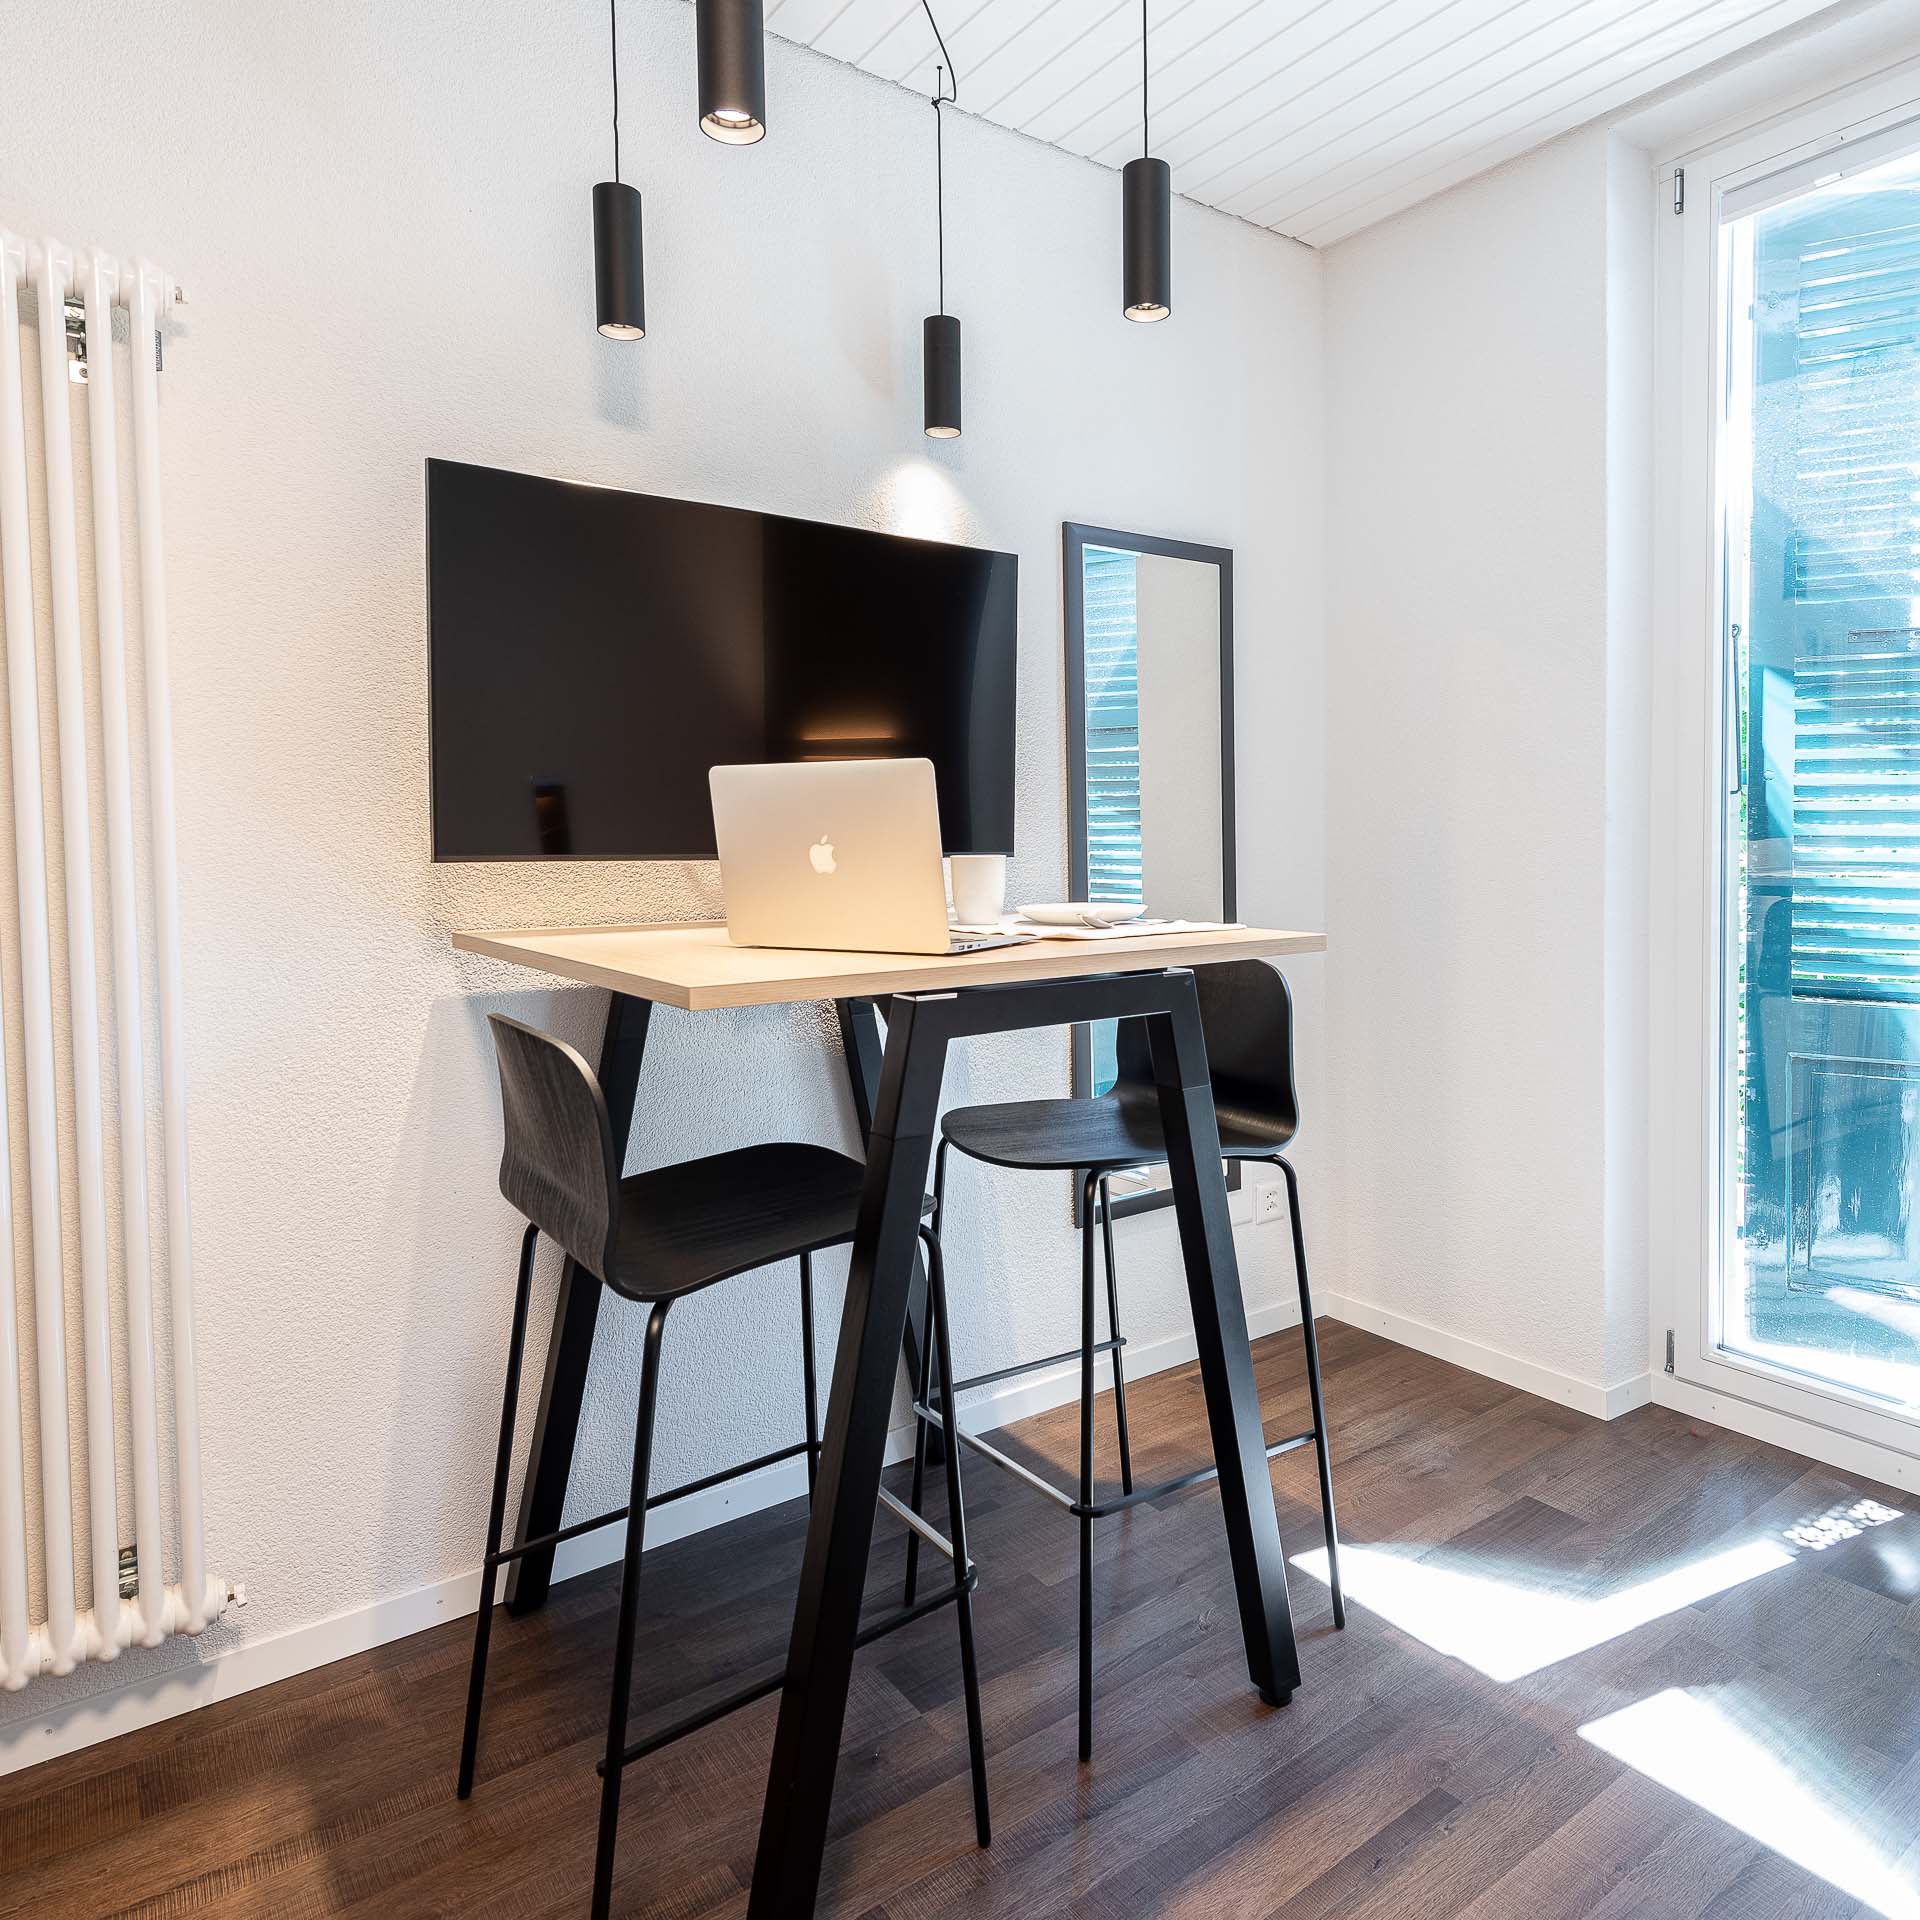 Bright studio apartment with a high table